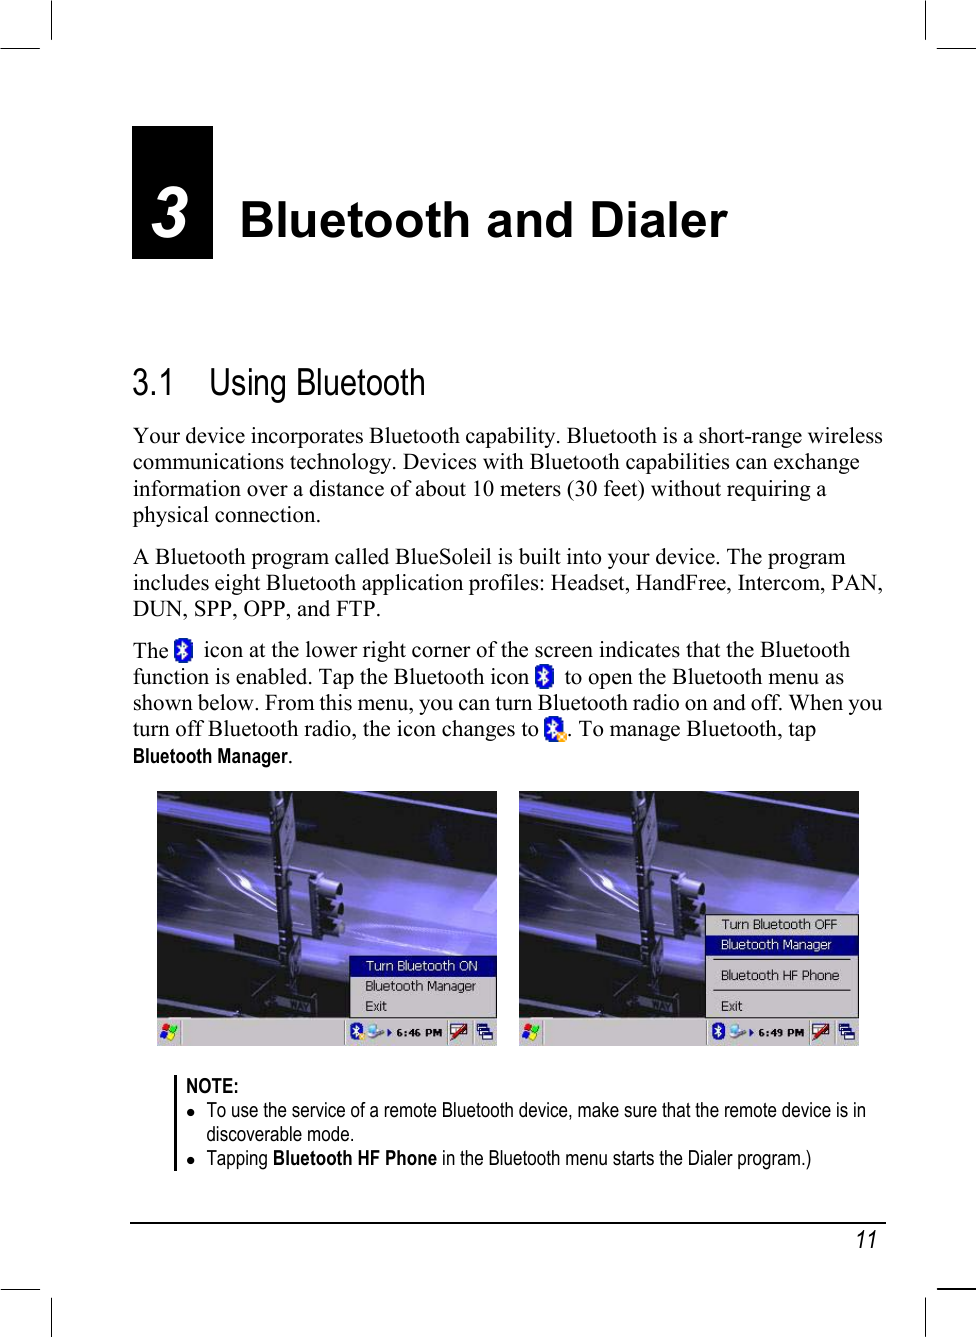   11 3  Bluetooth and Dialer 3.1 Using Bluetooth Your device incorporates Bluetooth capability. Bluetooth is a short-range wireless communications technology. Devices with Bluetooth capabilities can exchange information over a distance of about 10 meters (30 feet) without requiring a physical connection. A Bluetooth program called BlueSoleil is built into your device. The program includes eight Bluetooth application profiles: Headset, HandFree, Intercom, PAN, DUN, SPP, OPP, and FTP. The    icon at the lower right corner of the screen indicates that the Bluetooth function is enabled. Tap the Bluetooth icon    to open the Bluetooth menu as shown below. From this menu, you can turn Bluetooth radio on and off. When you turn off Bluetooth radio, the icon changes to  . To manage Bluetooth, tap Bluetooth Manager.       NOTE:  To use the service of a remote Bluetooth device, make sure that the remote device is in discoverable mode.  Tapping Bluetooth HF Phone in the Bluetooth menu starts the Dialer program.) 